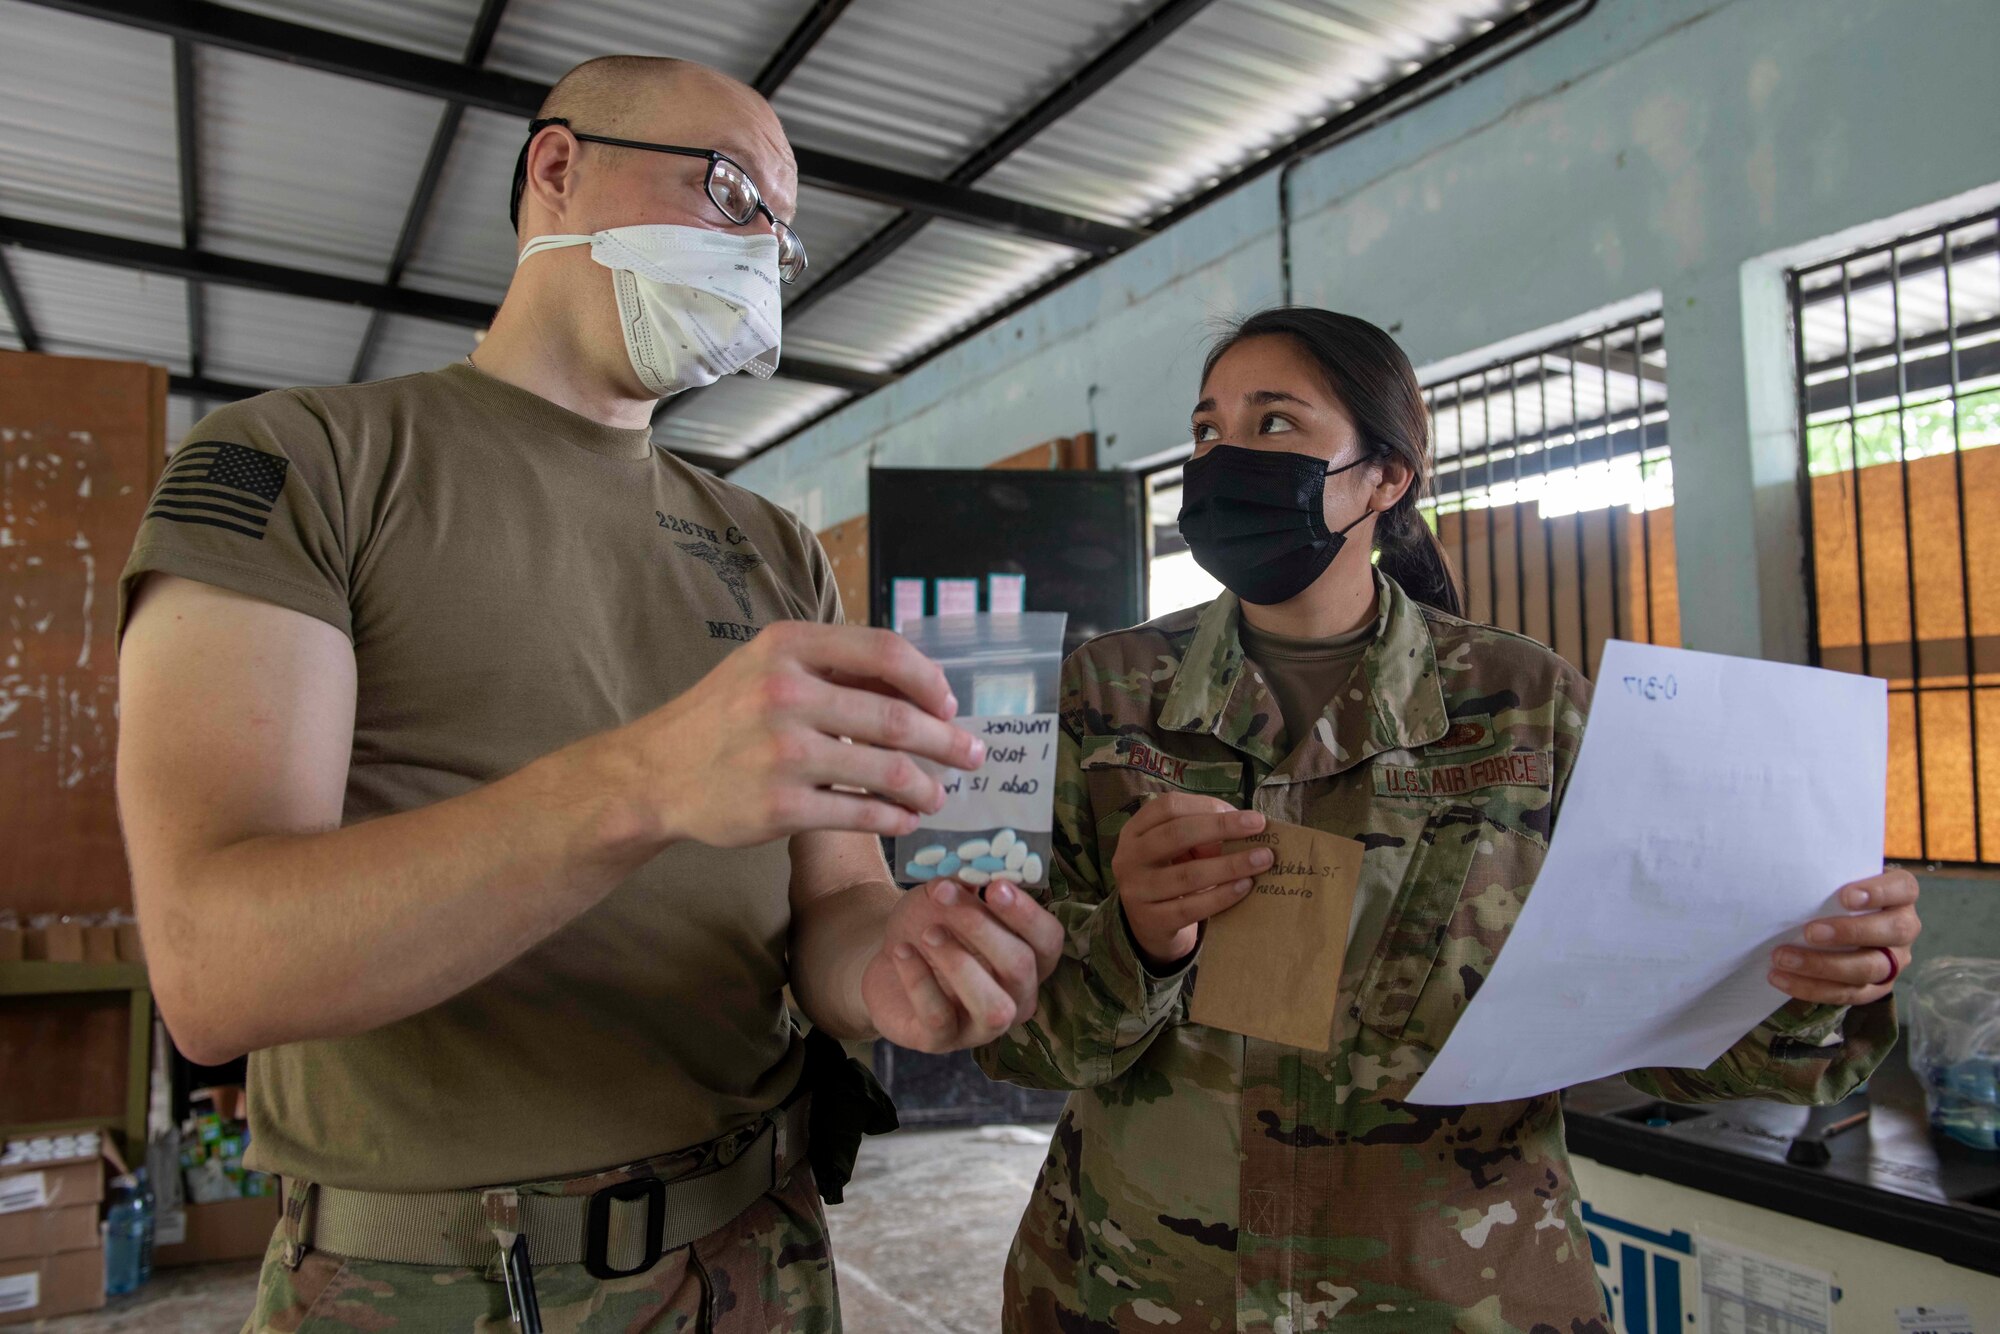 U.S. Air Force Capt. Jennifer Buck, an operations research analyst from the Studies and Analysis Squadron at Joint Base San Antonio-Randolph, Texas, and U.S. Army Spc. Craig Fluth, a healthcare specialist with the 28th Combat Support Hospital of Joint Base San Antonio, Texas, review a patient’s prescribed medications during Resolute Sentinel 21 in Melchor De Mencos, Guatemala, June 17, 2021. Operations research analysts are problem solvers who use advanced analytical techniques, such as big data mining, and optimization and statistical analysis to come up with solutions that help businesses and organizations operate more efficiently and cost-effectively.